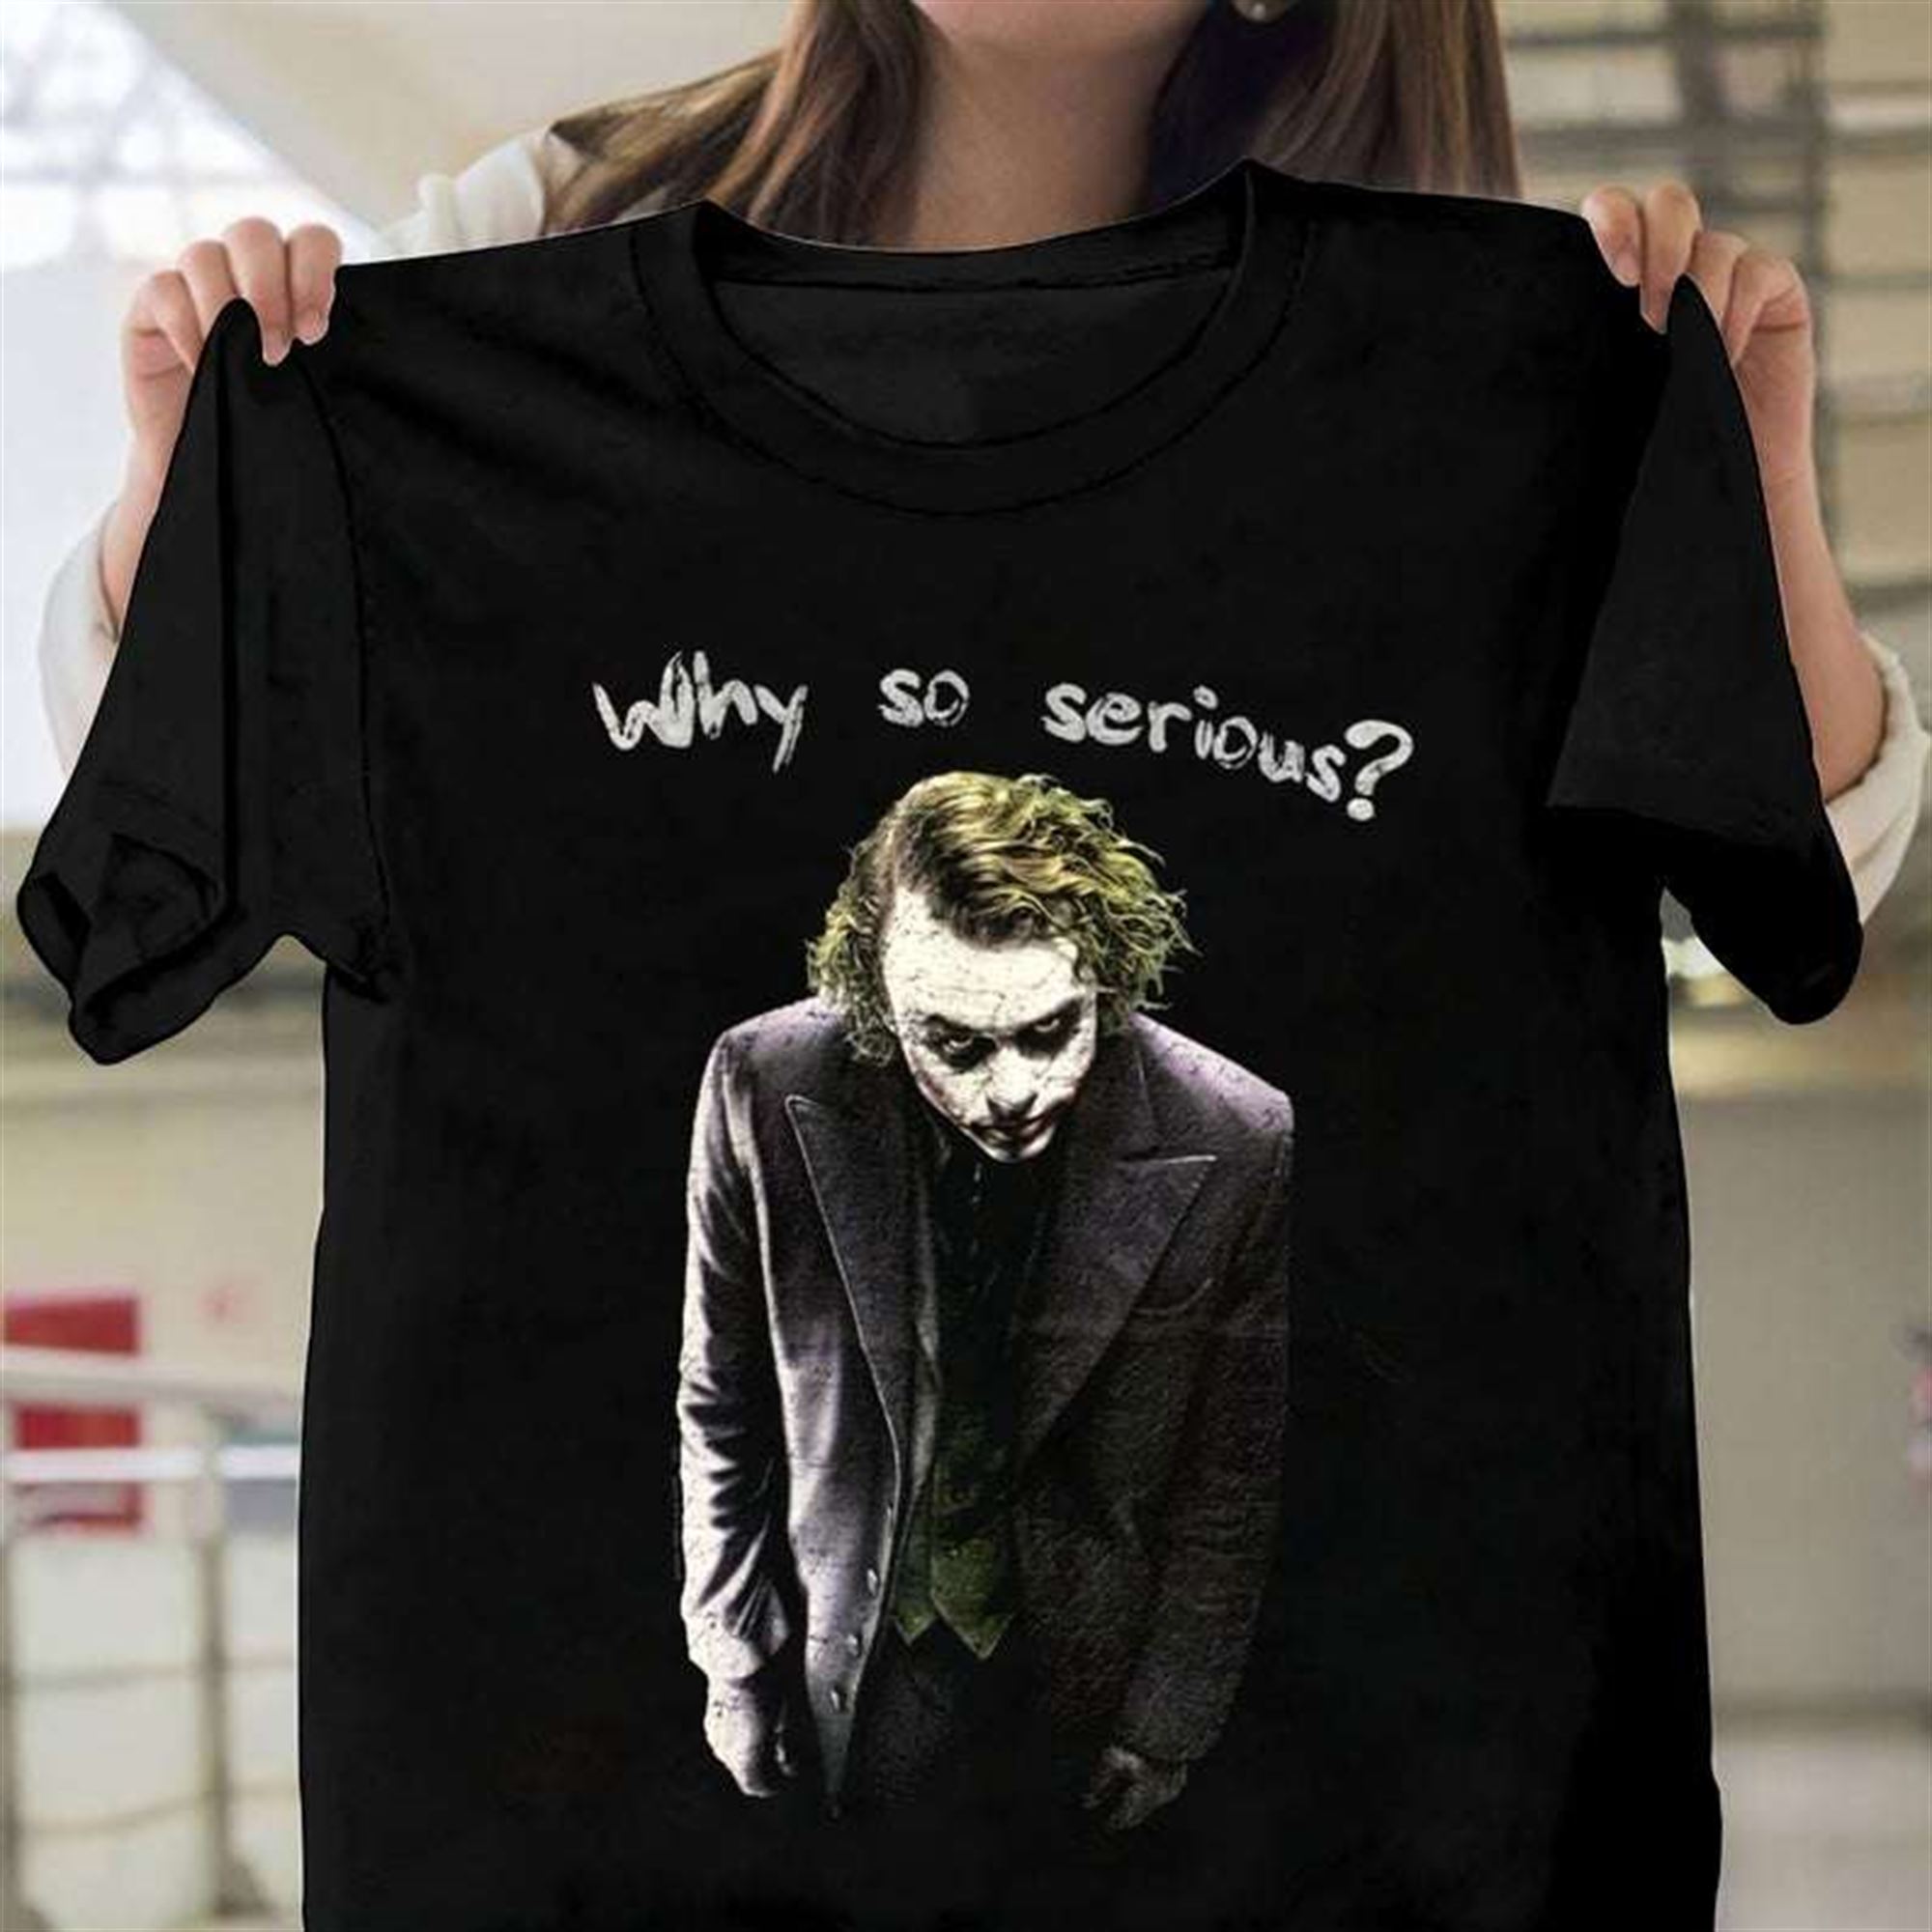 The Joker Why So Serious T-shirt Plus Size Up To 5x